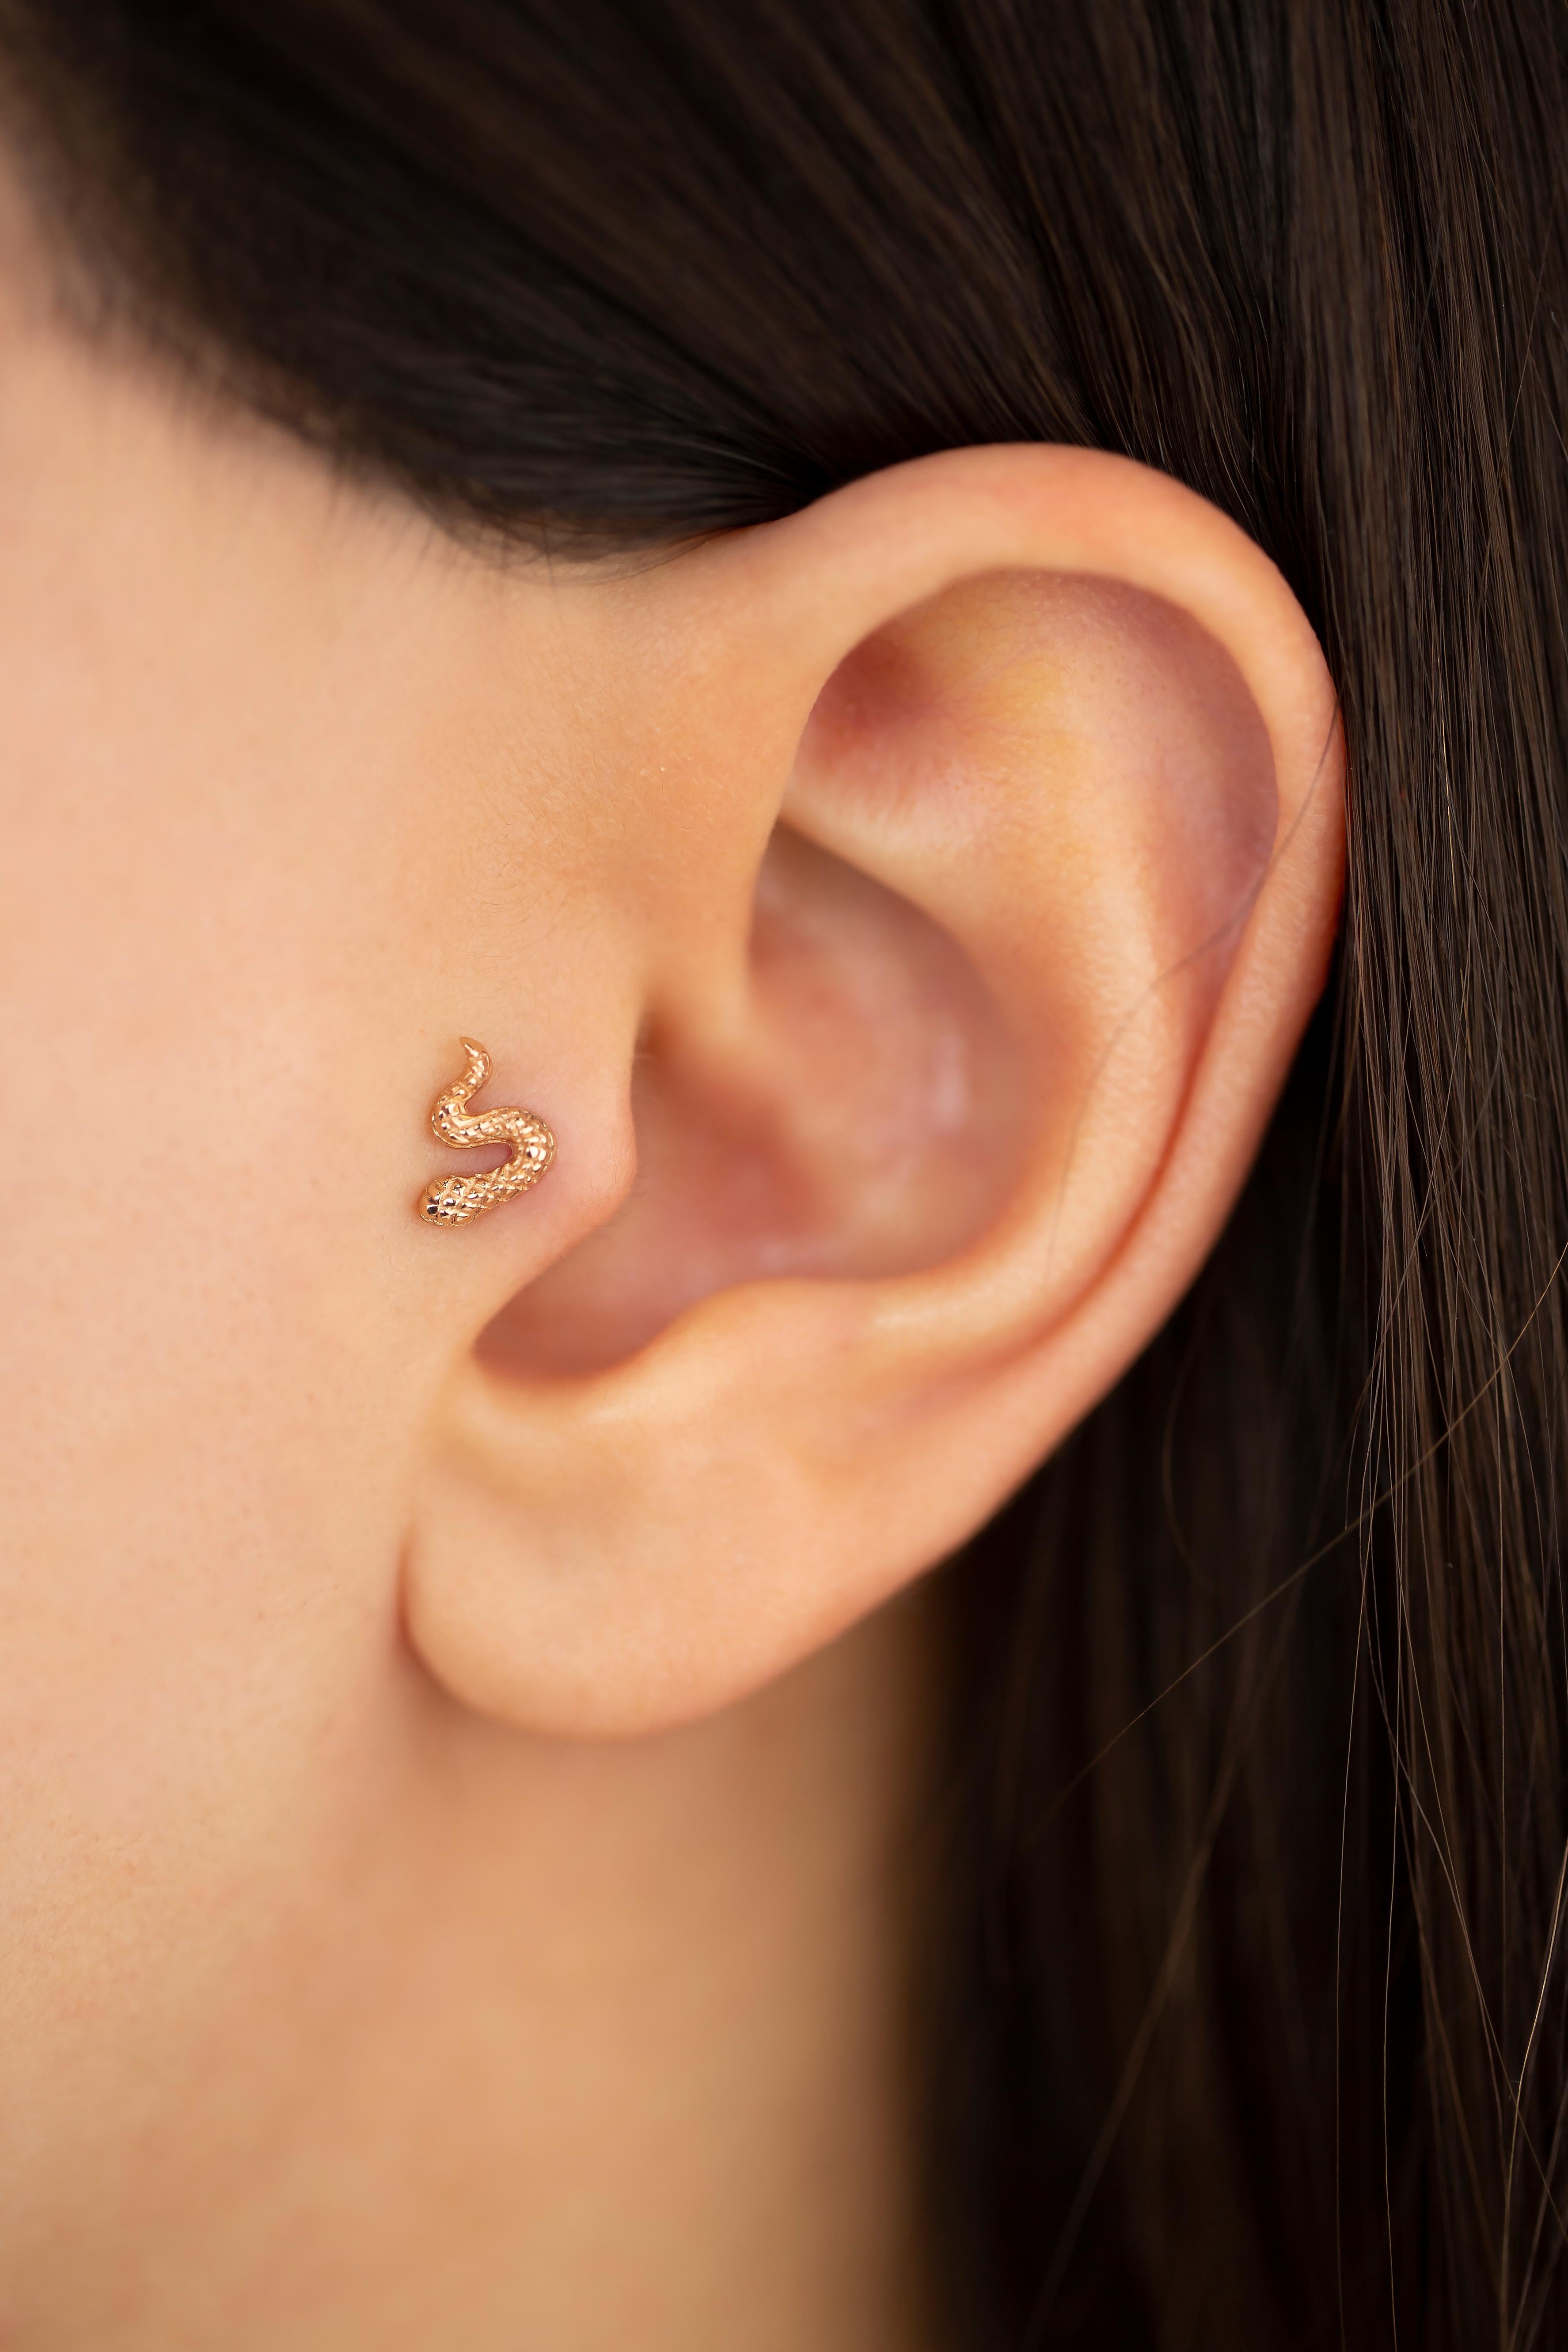 14K Rose Gold Cute Serpent Piercing, Bold Snake Rose Gold Stud Earring

You can use the piercing as an earring too! Also this piercing is suitable for tragus, nose, helix, lobe, flat, medusa, monreo, labret and stud.

This piercing was made with